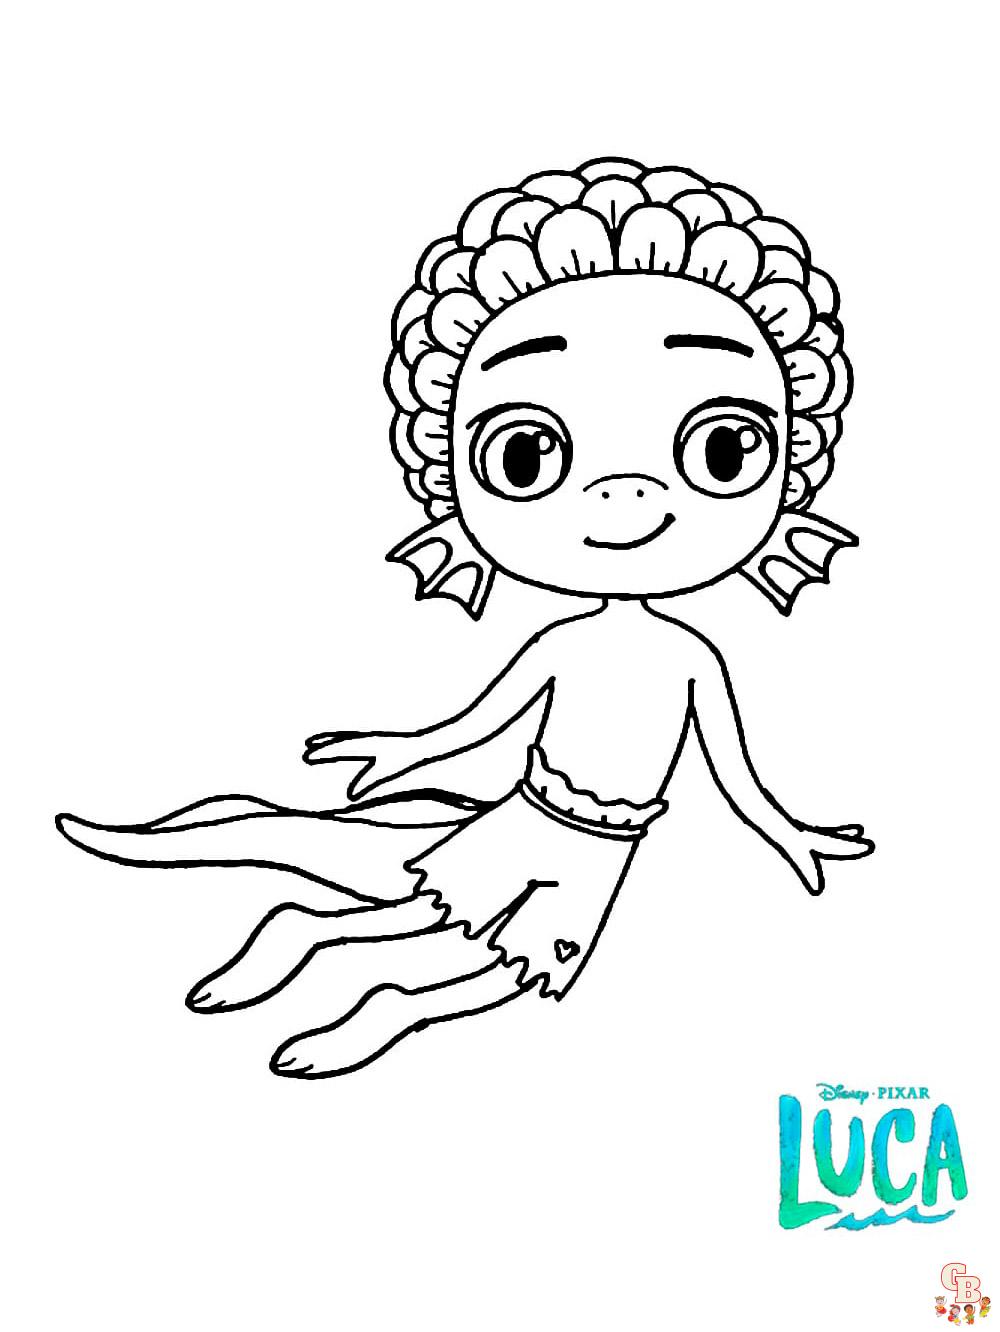 Luca Coloring Pages 5